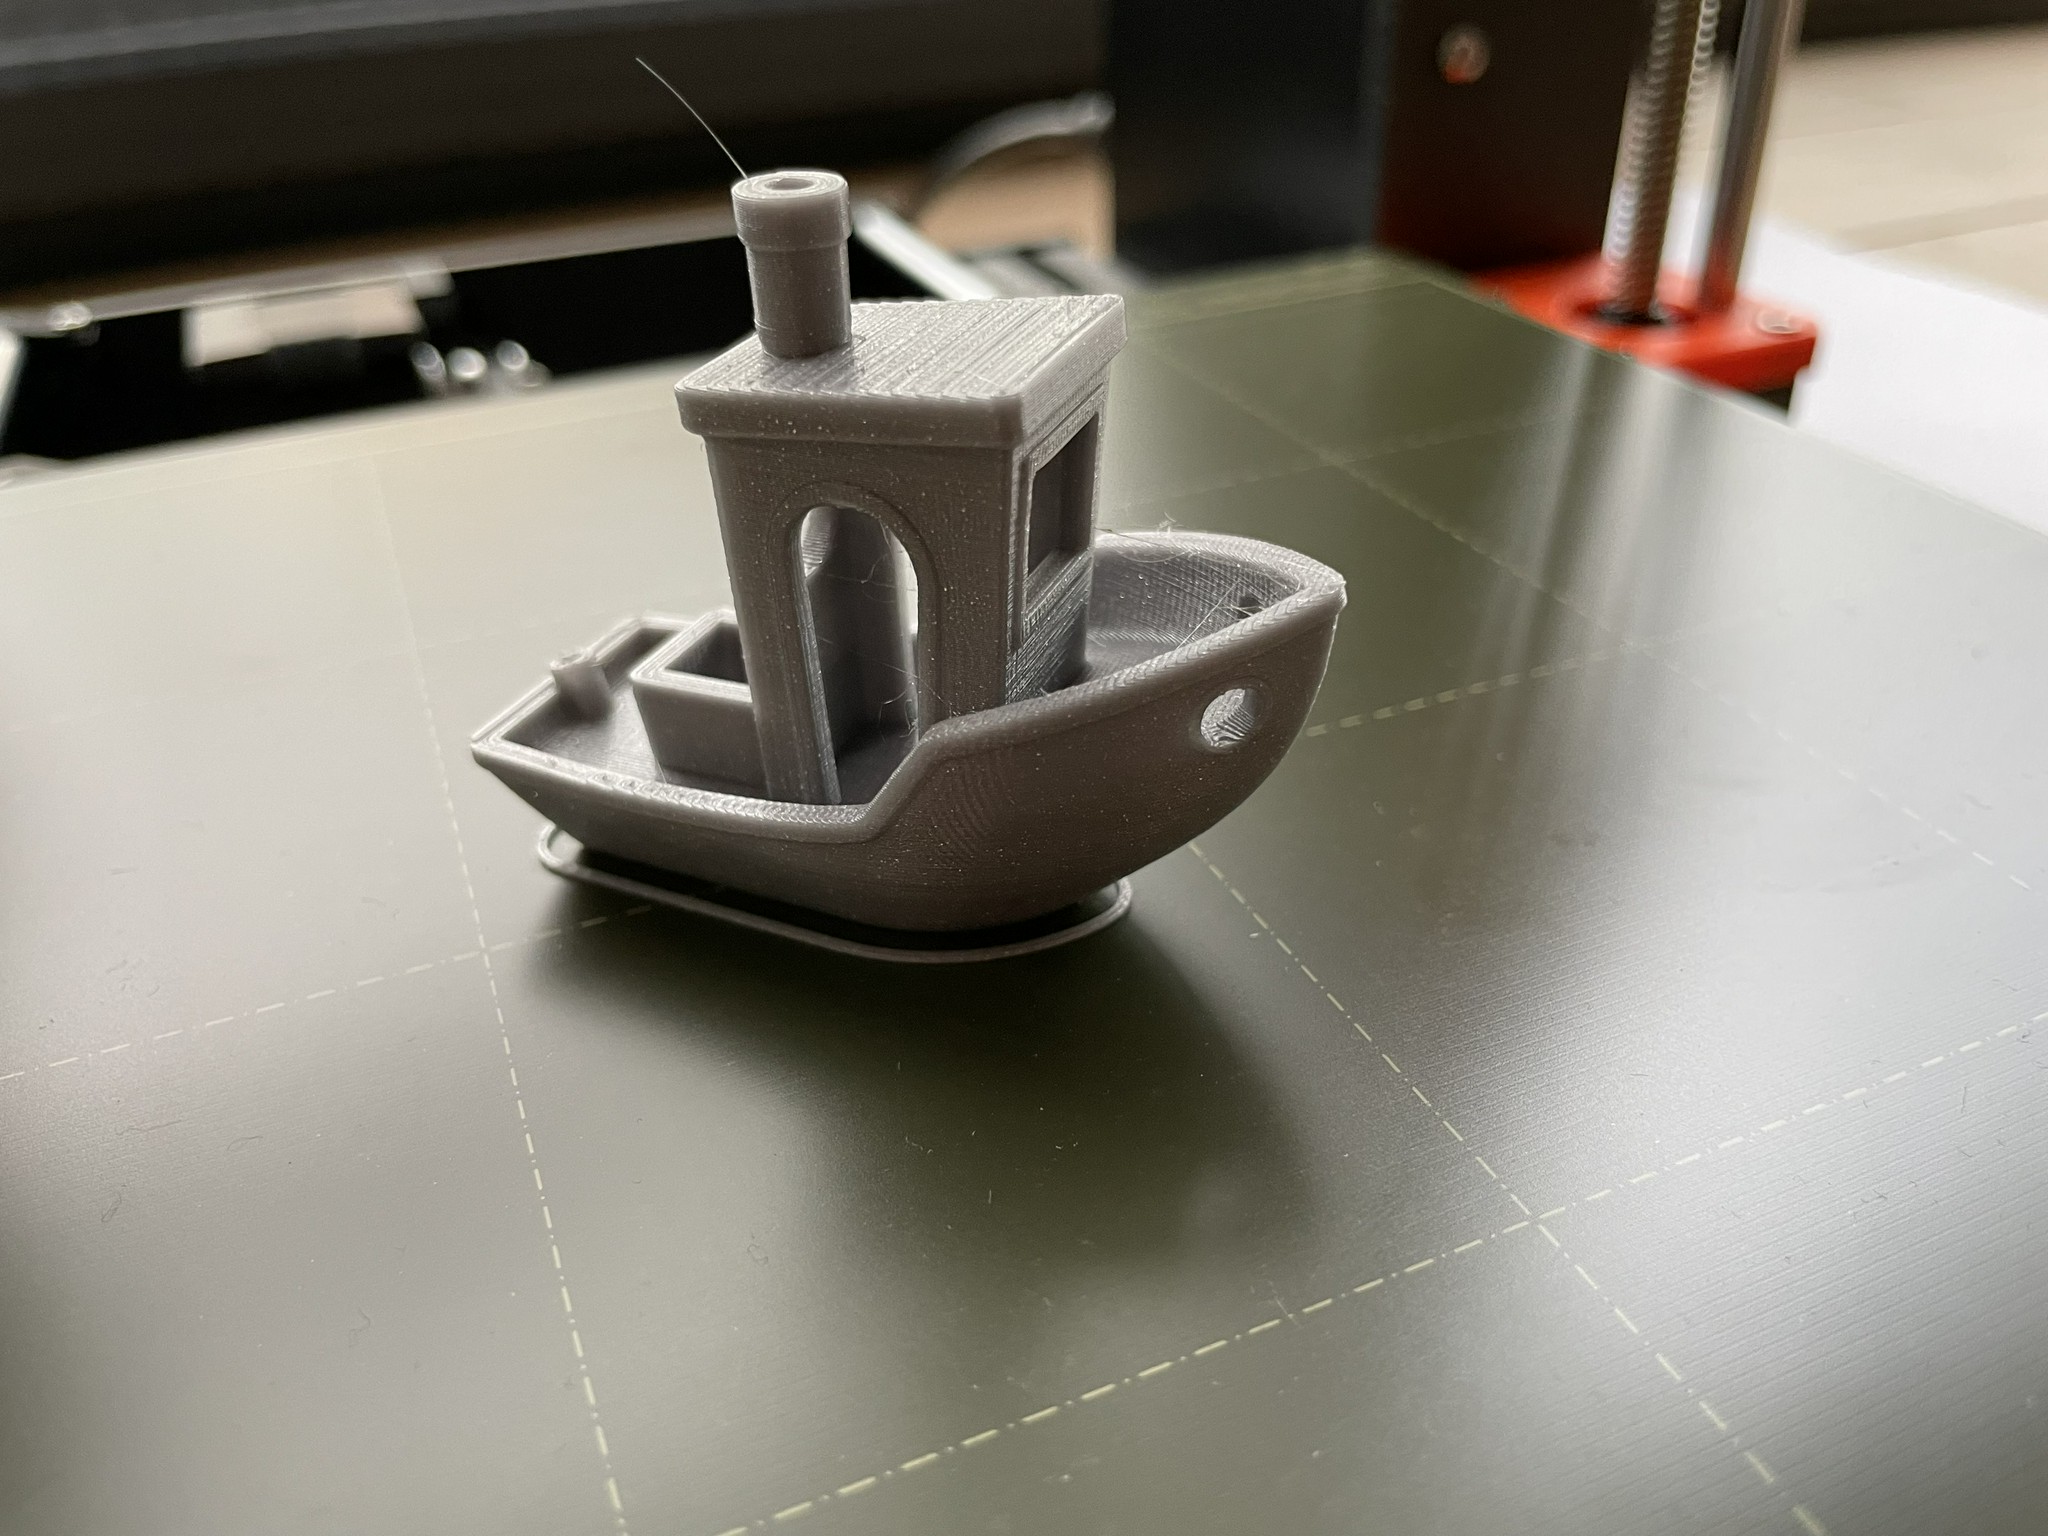 The Benchy is a famous 3D object that is used to test and benchmark 3D printers due to its curves, edges and details.